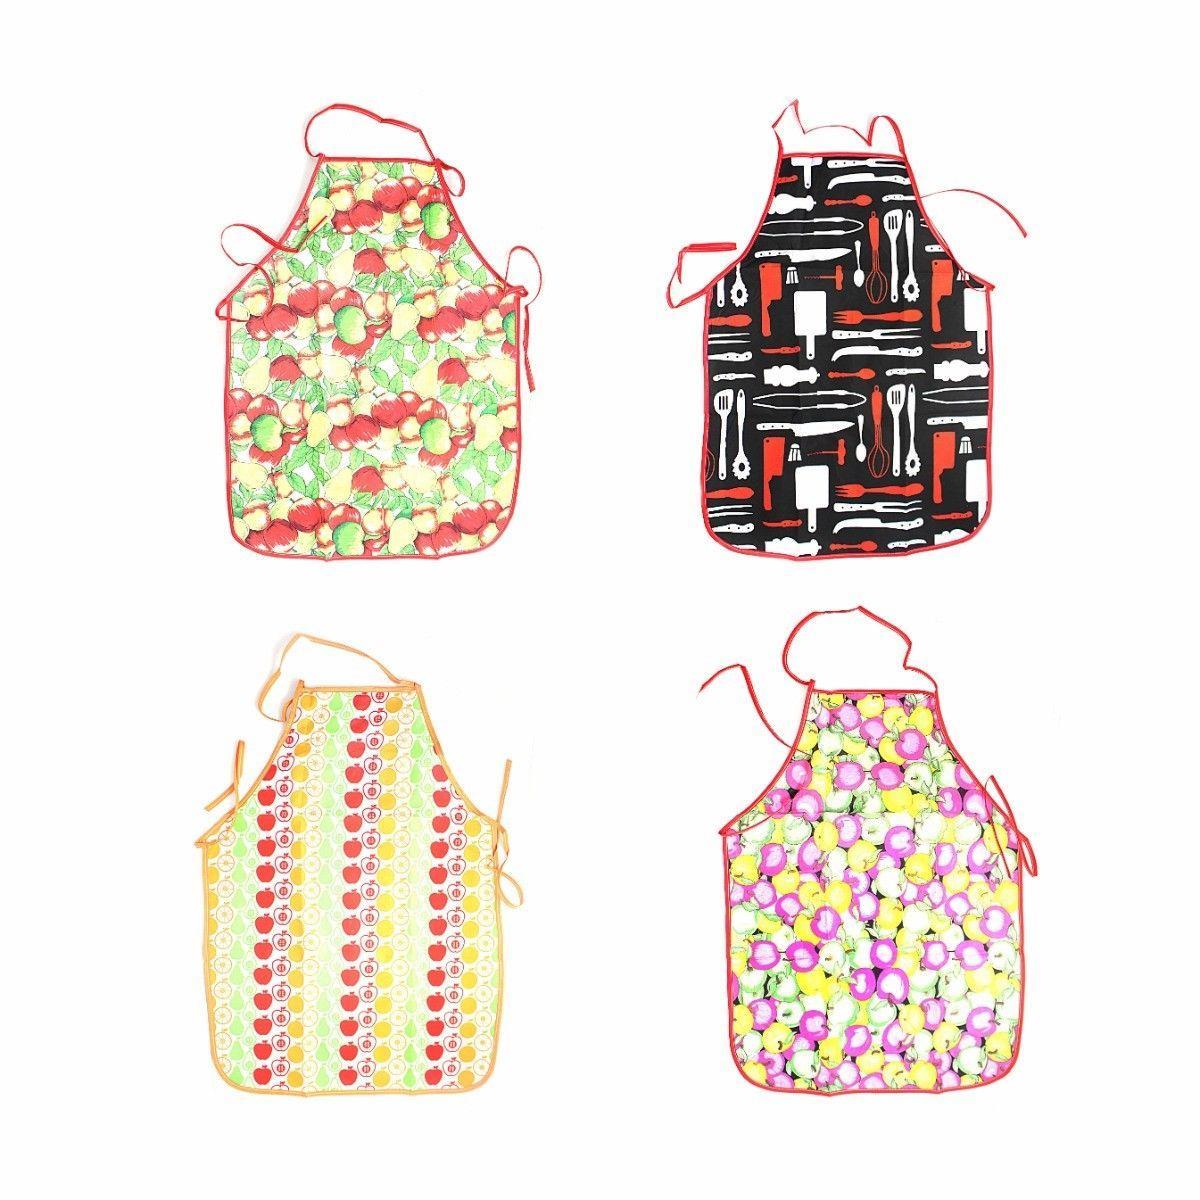 Kitchen Baking Cooking Apron 74 x 55 cm Assorted Designs 5919 (Large Letter Rate)